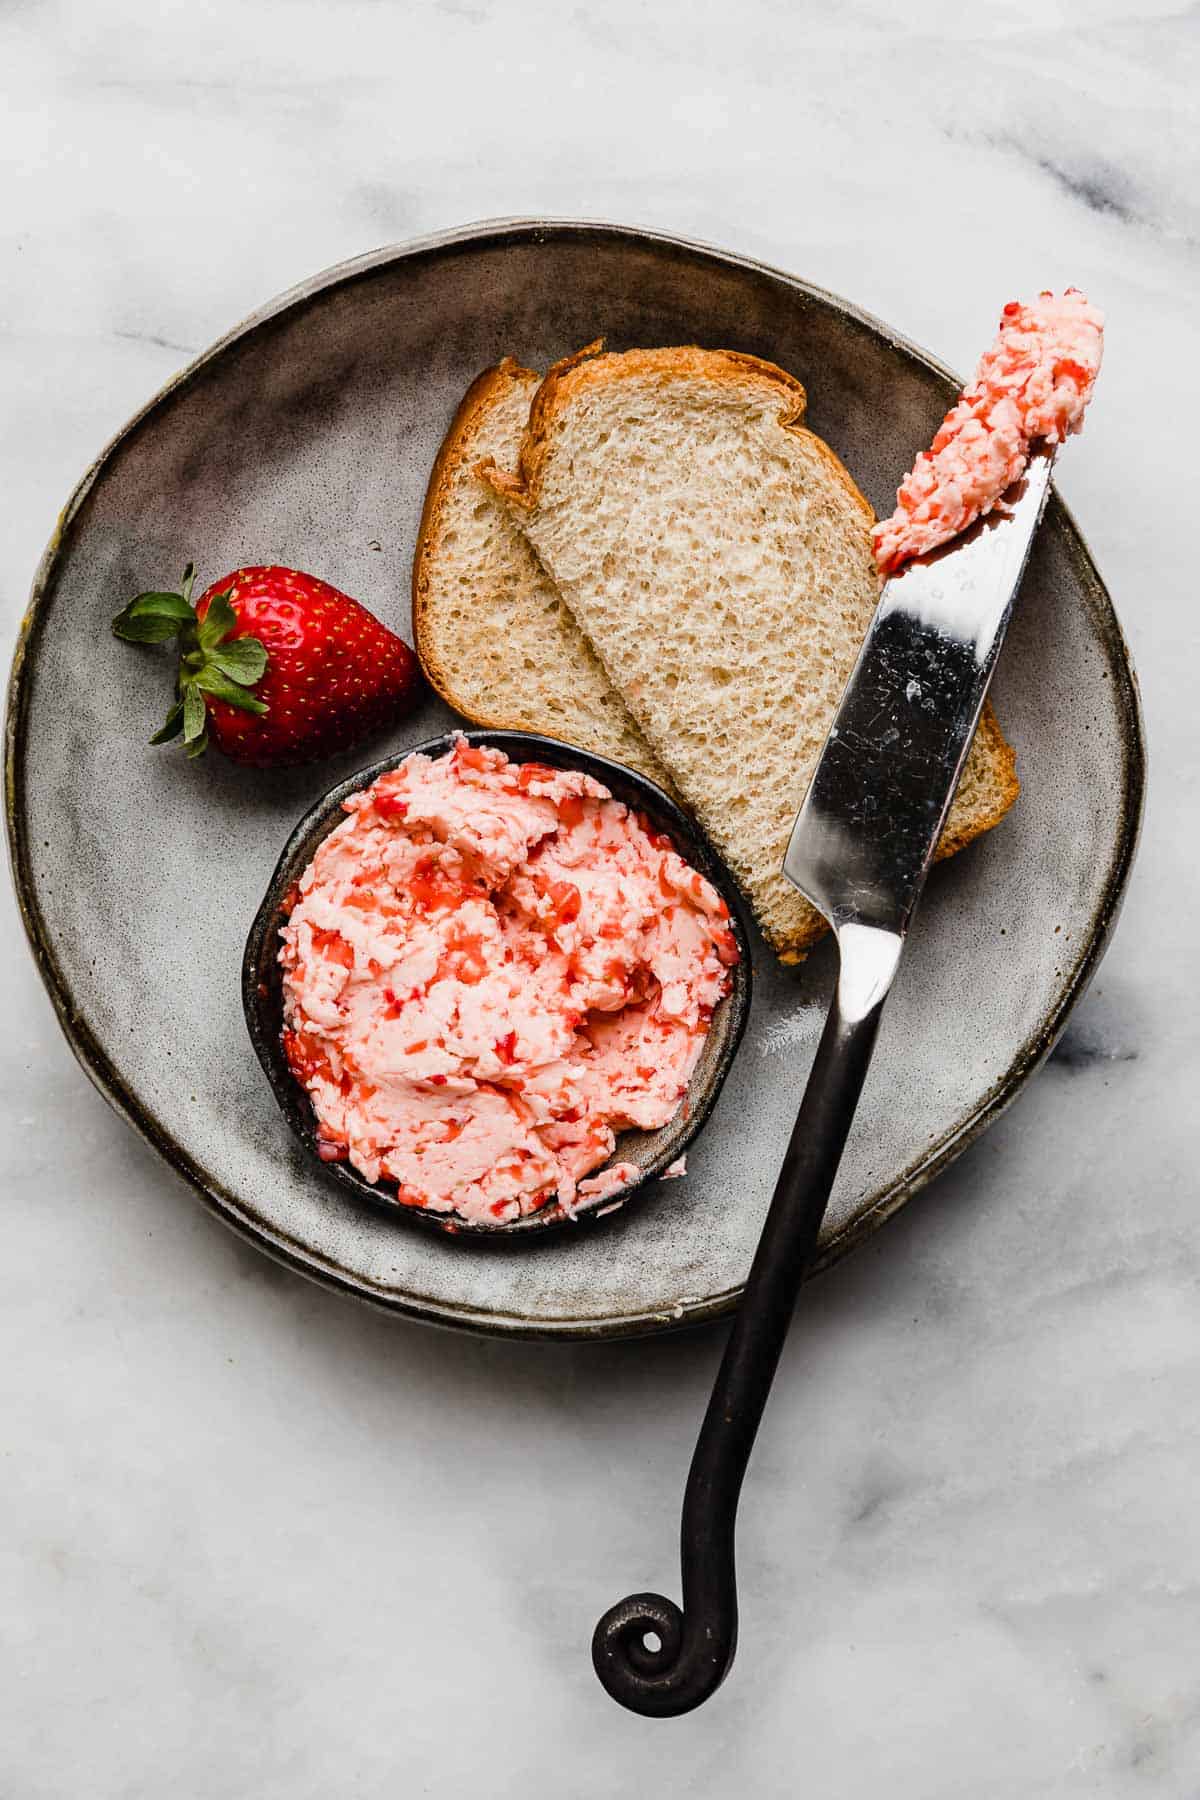 Strawberry Butter in a black bowl alongside two half slices of bread and a butter knife with fresh Strawberry Butter smeared on the knife.